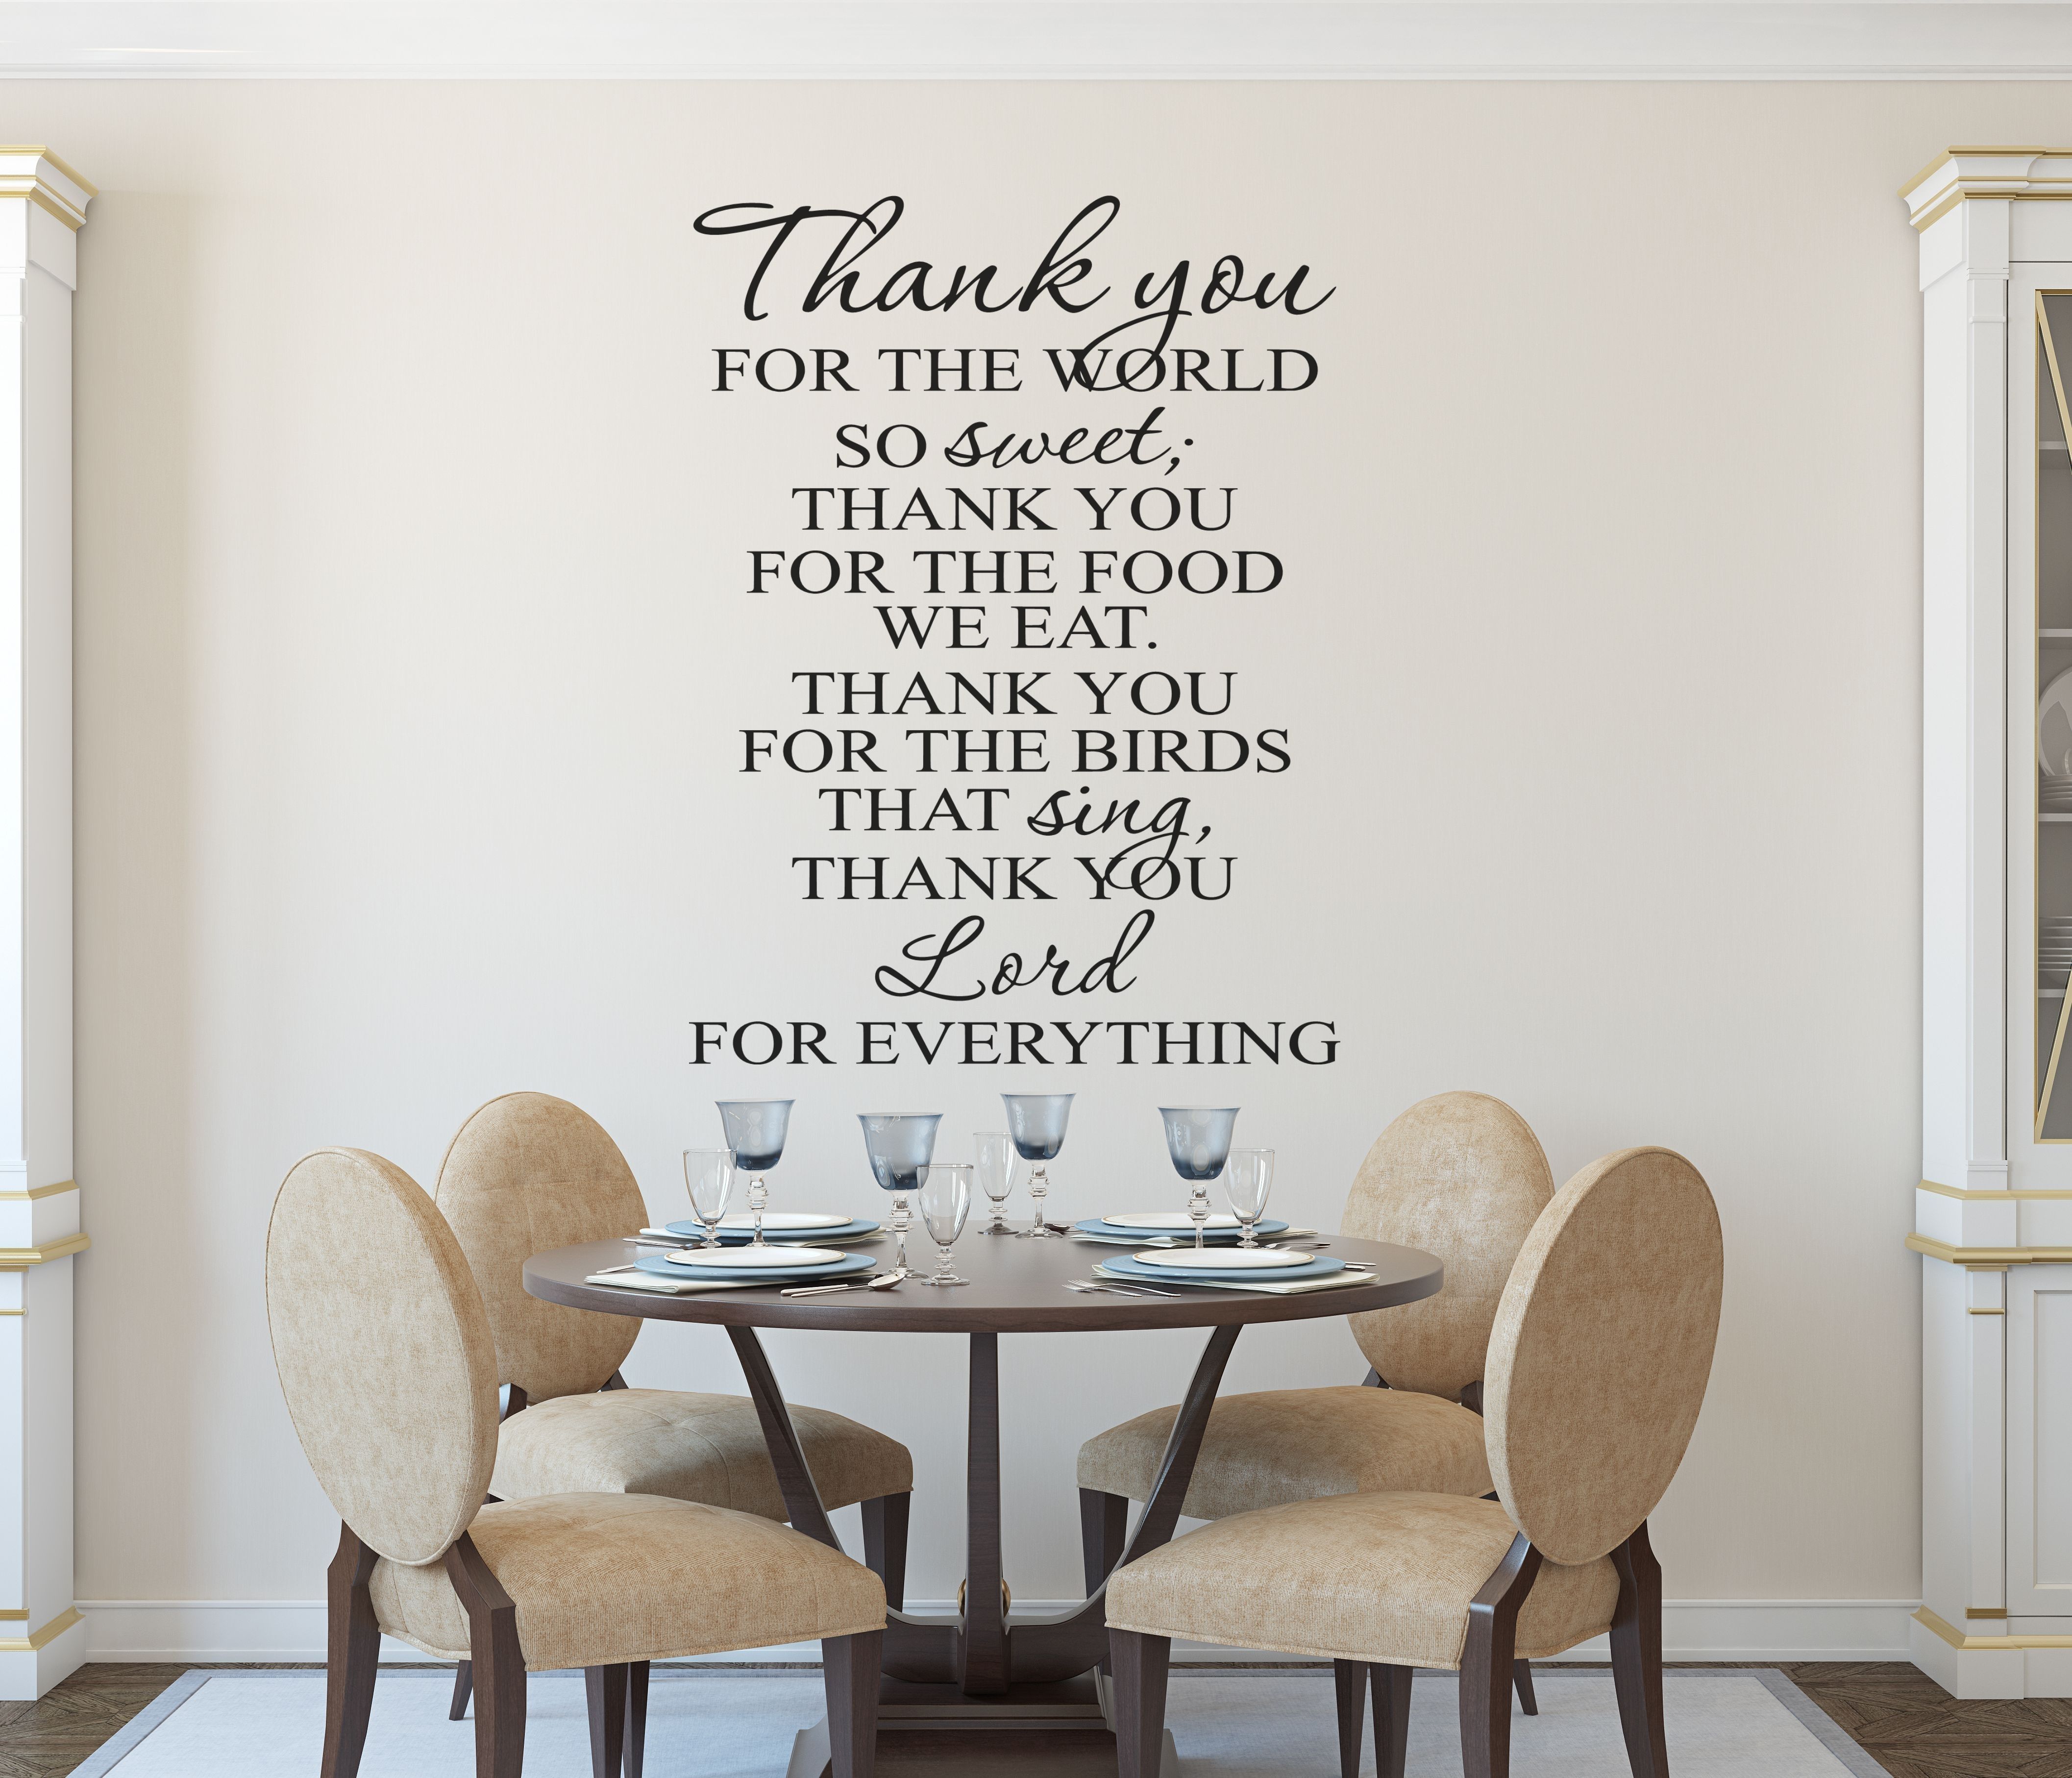 Fabulous Free Printable Wall Art Quotes Along With Calvin Then With Regard To Wall Art For Kitchen (Photo 16 of 20)